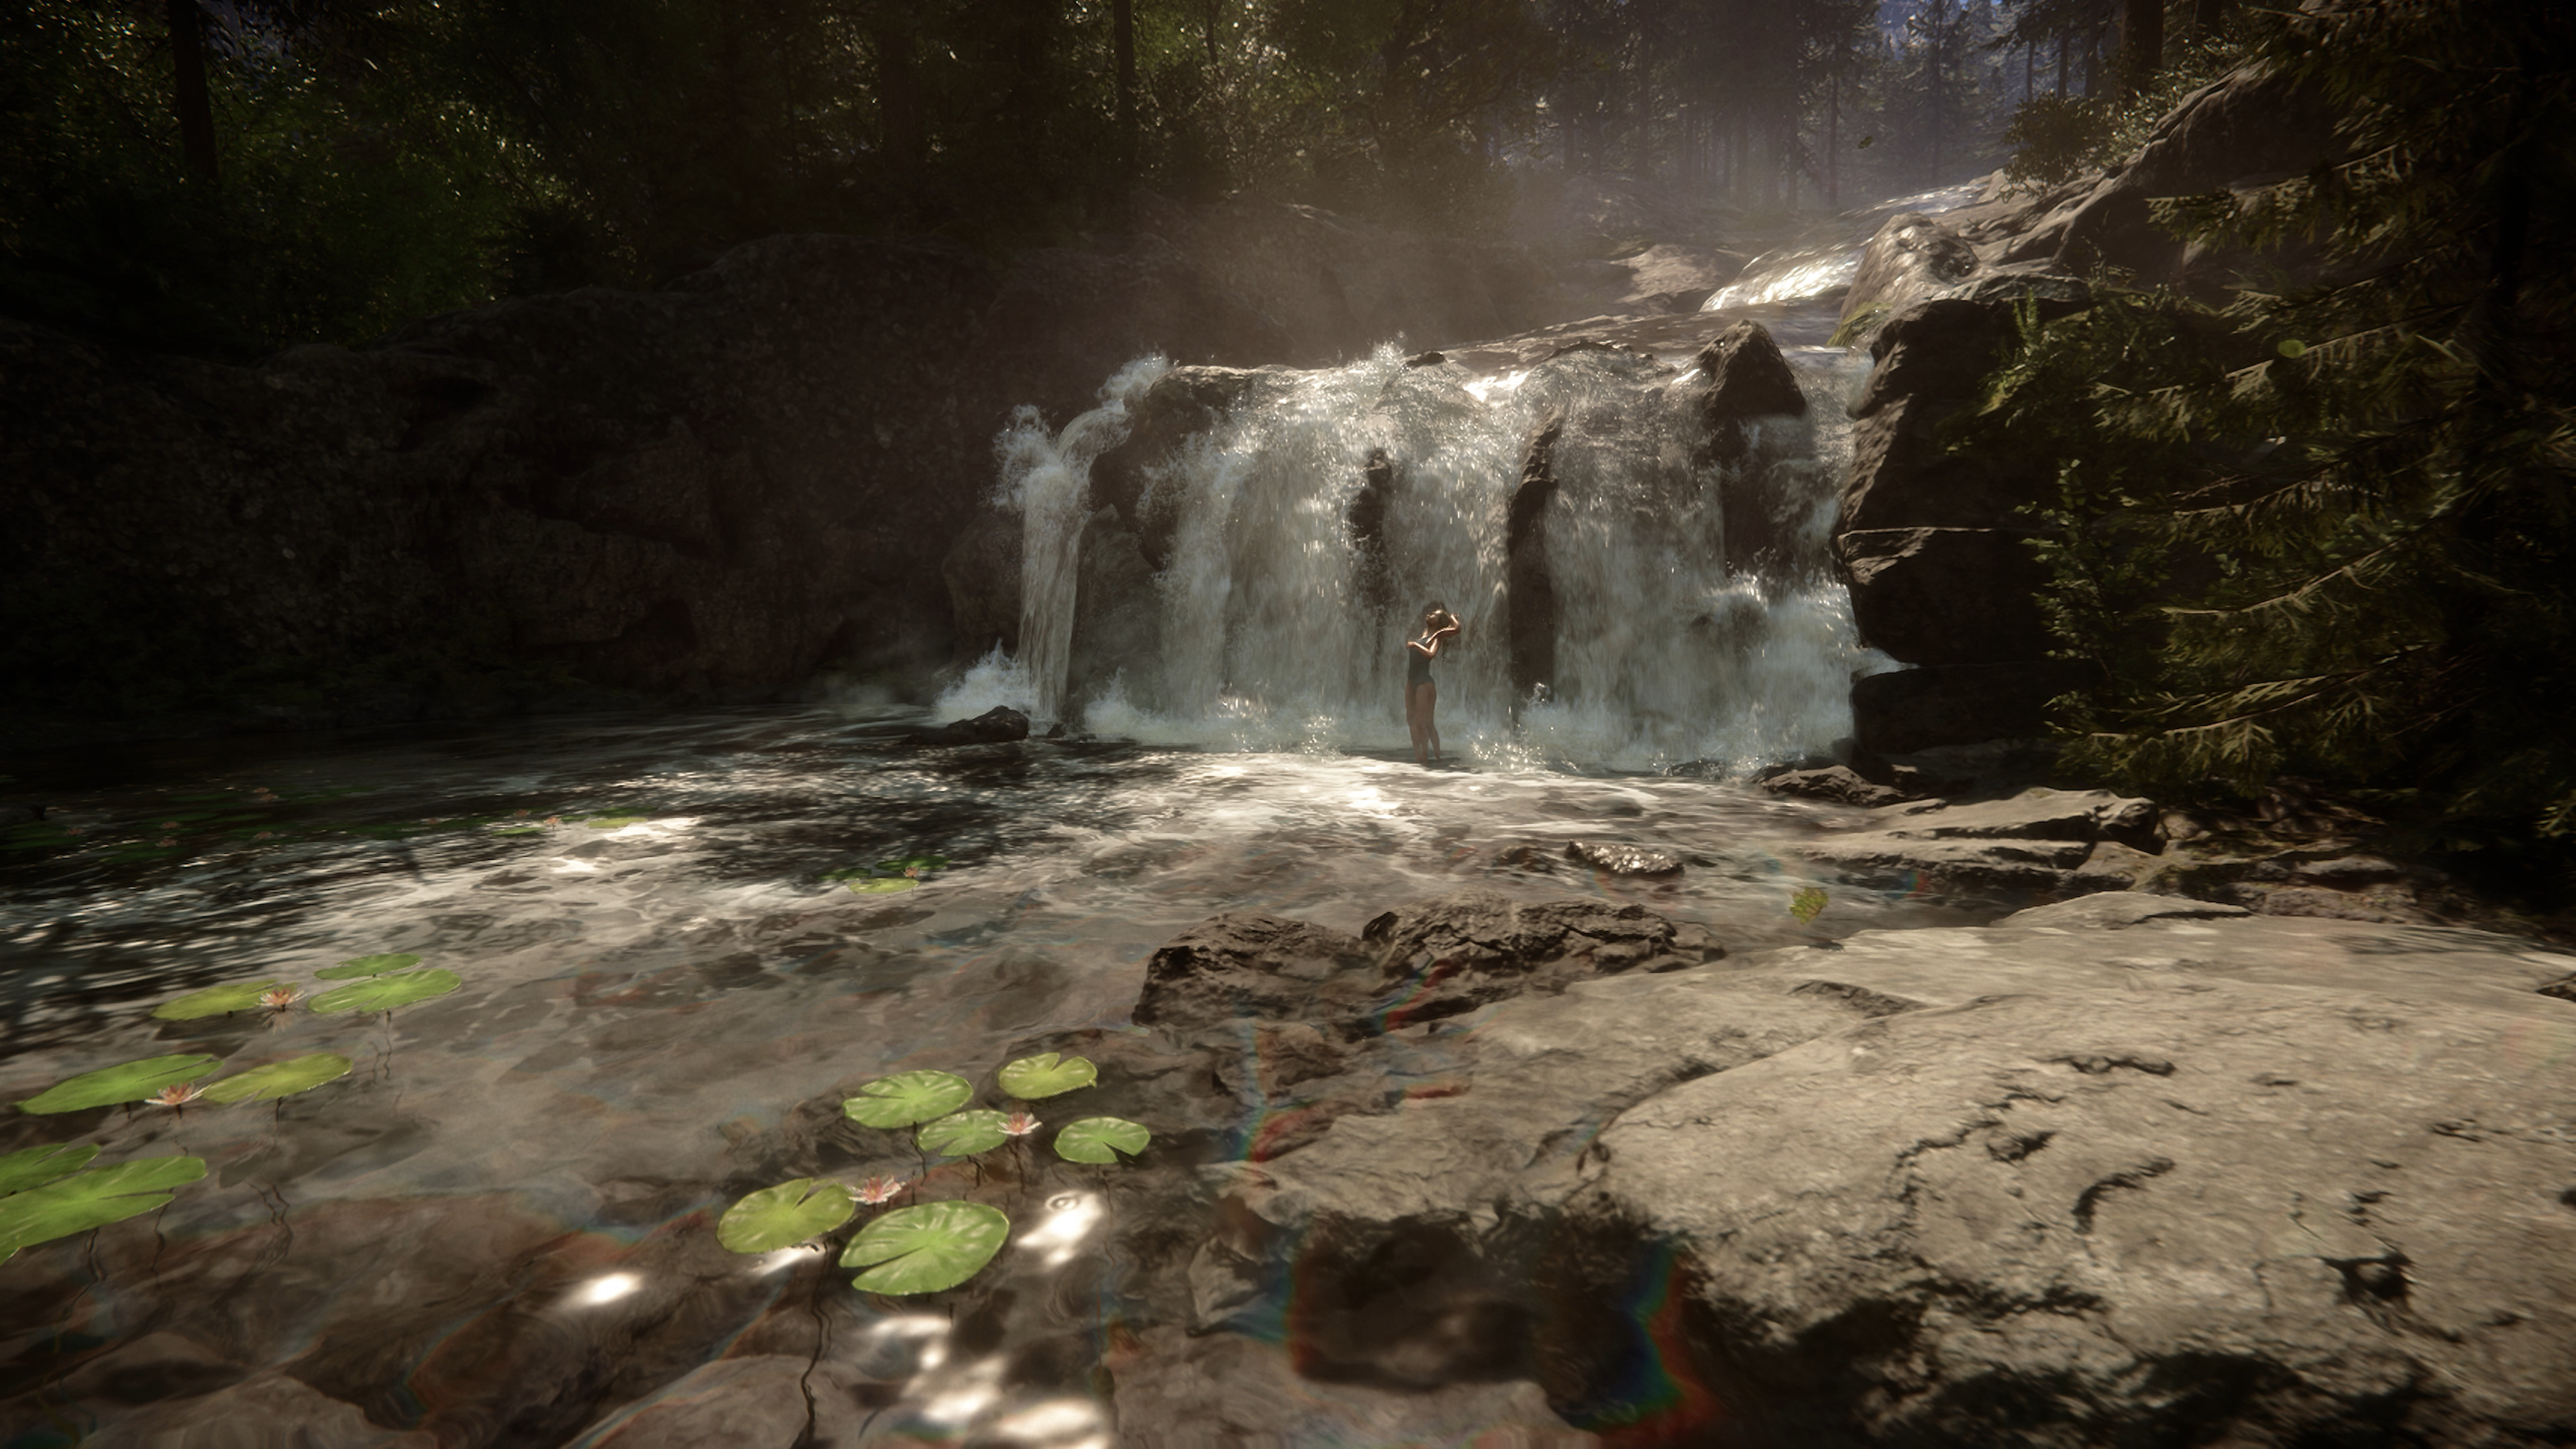 Sons of the Forest - A beautiful scene with a waterfall, deep in the forest. A woman with multiple limbs and mutations bathes under the stream.